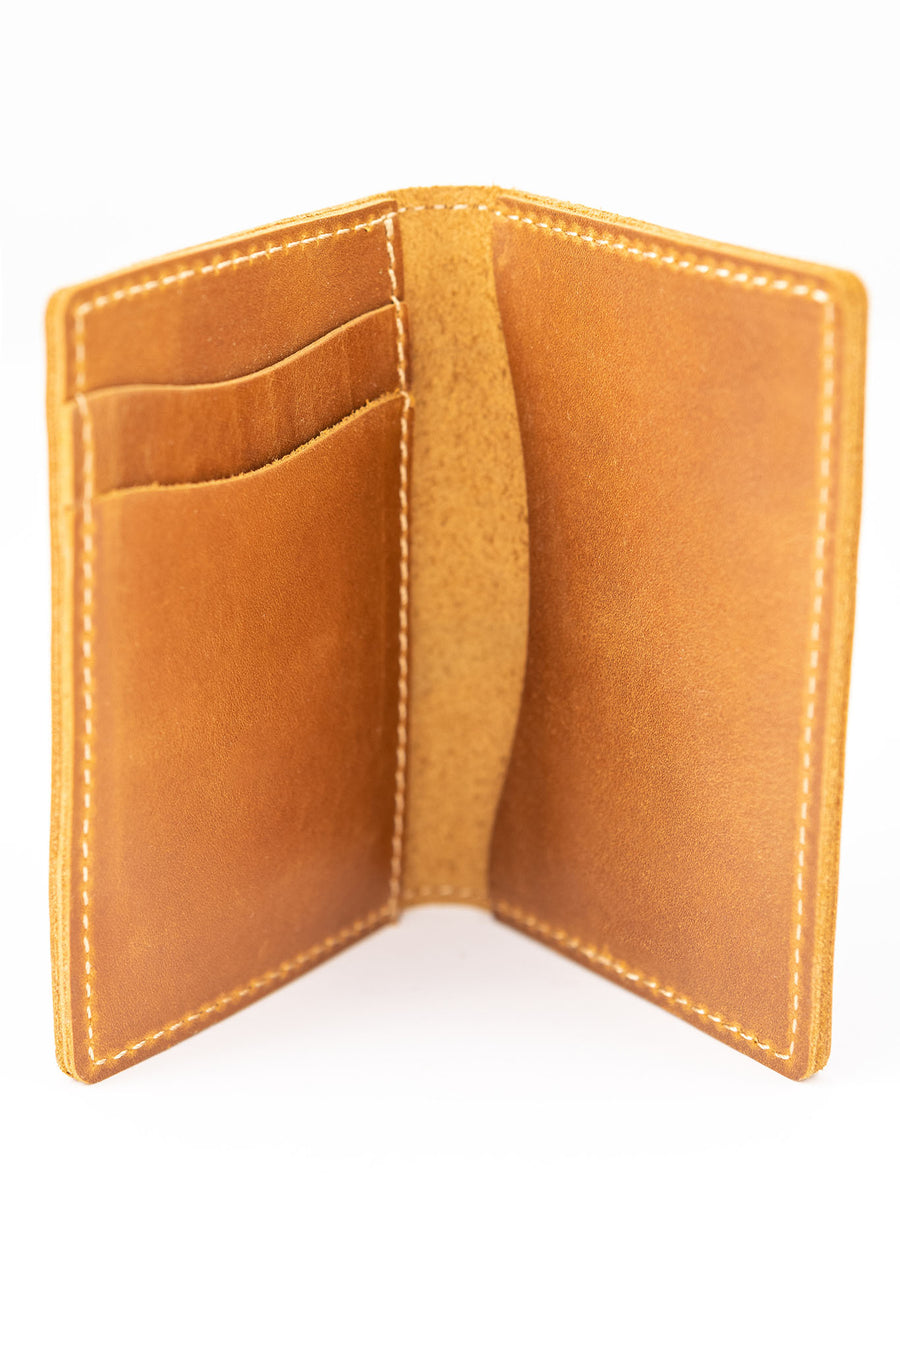 Thin bifold full grain leather wallet open to show card holder and cash pockets